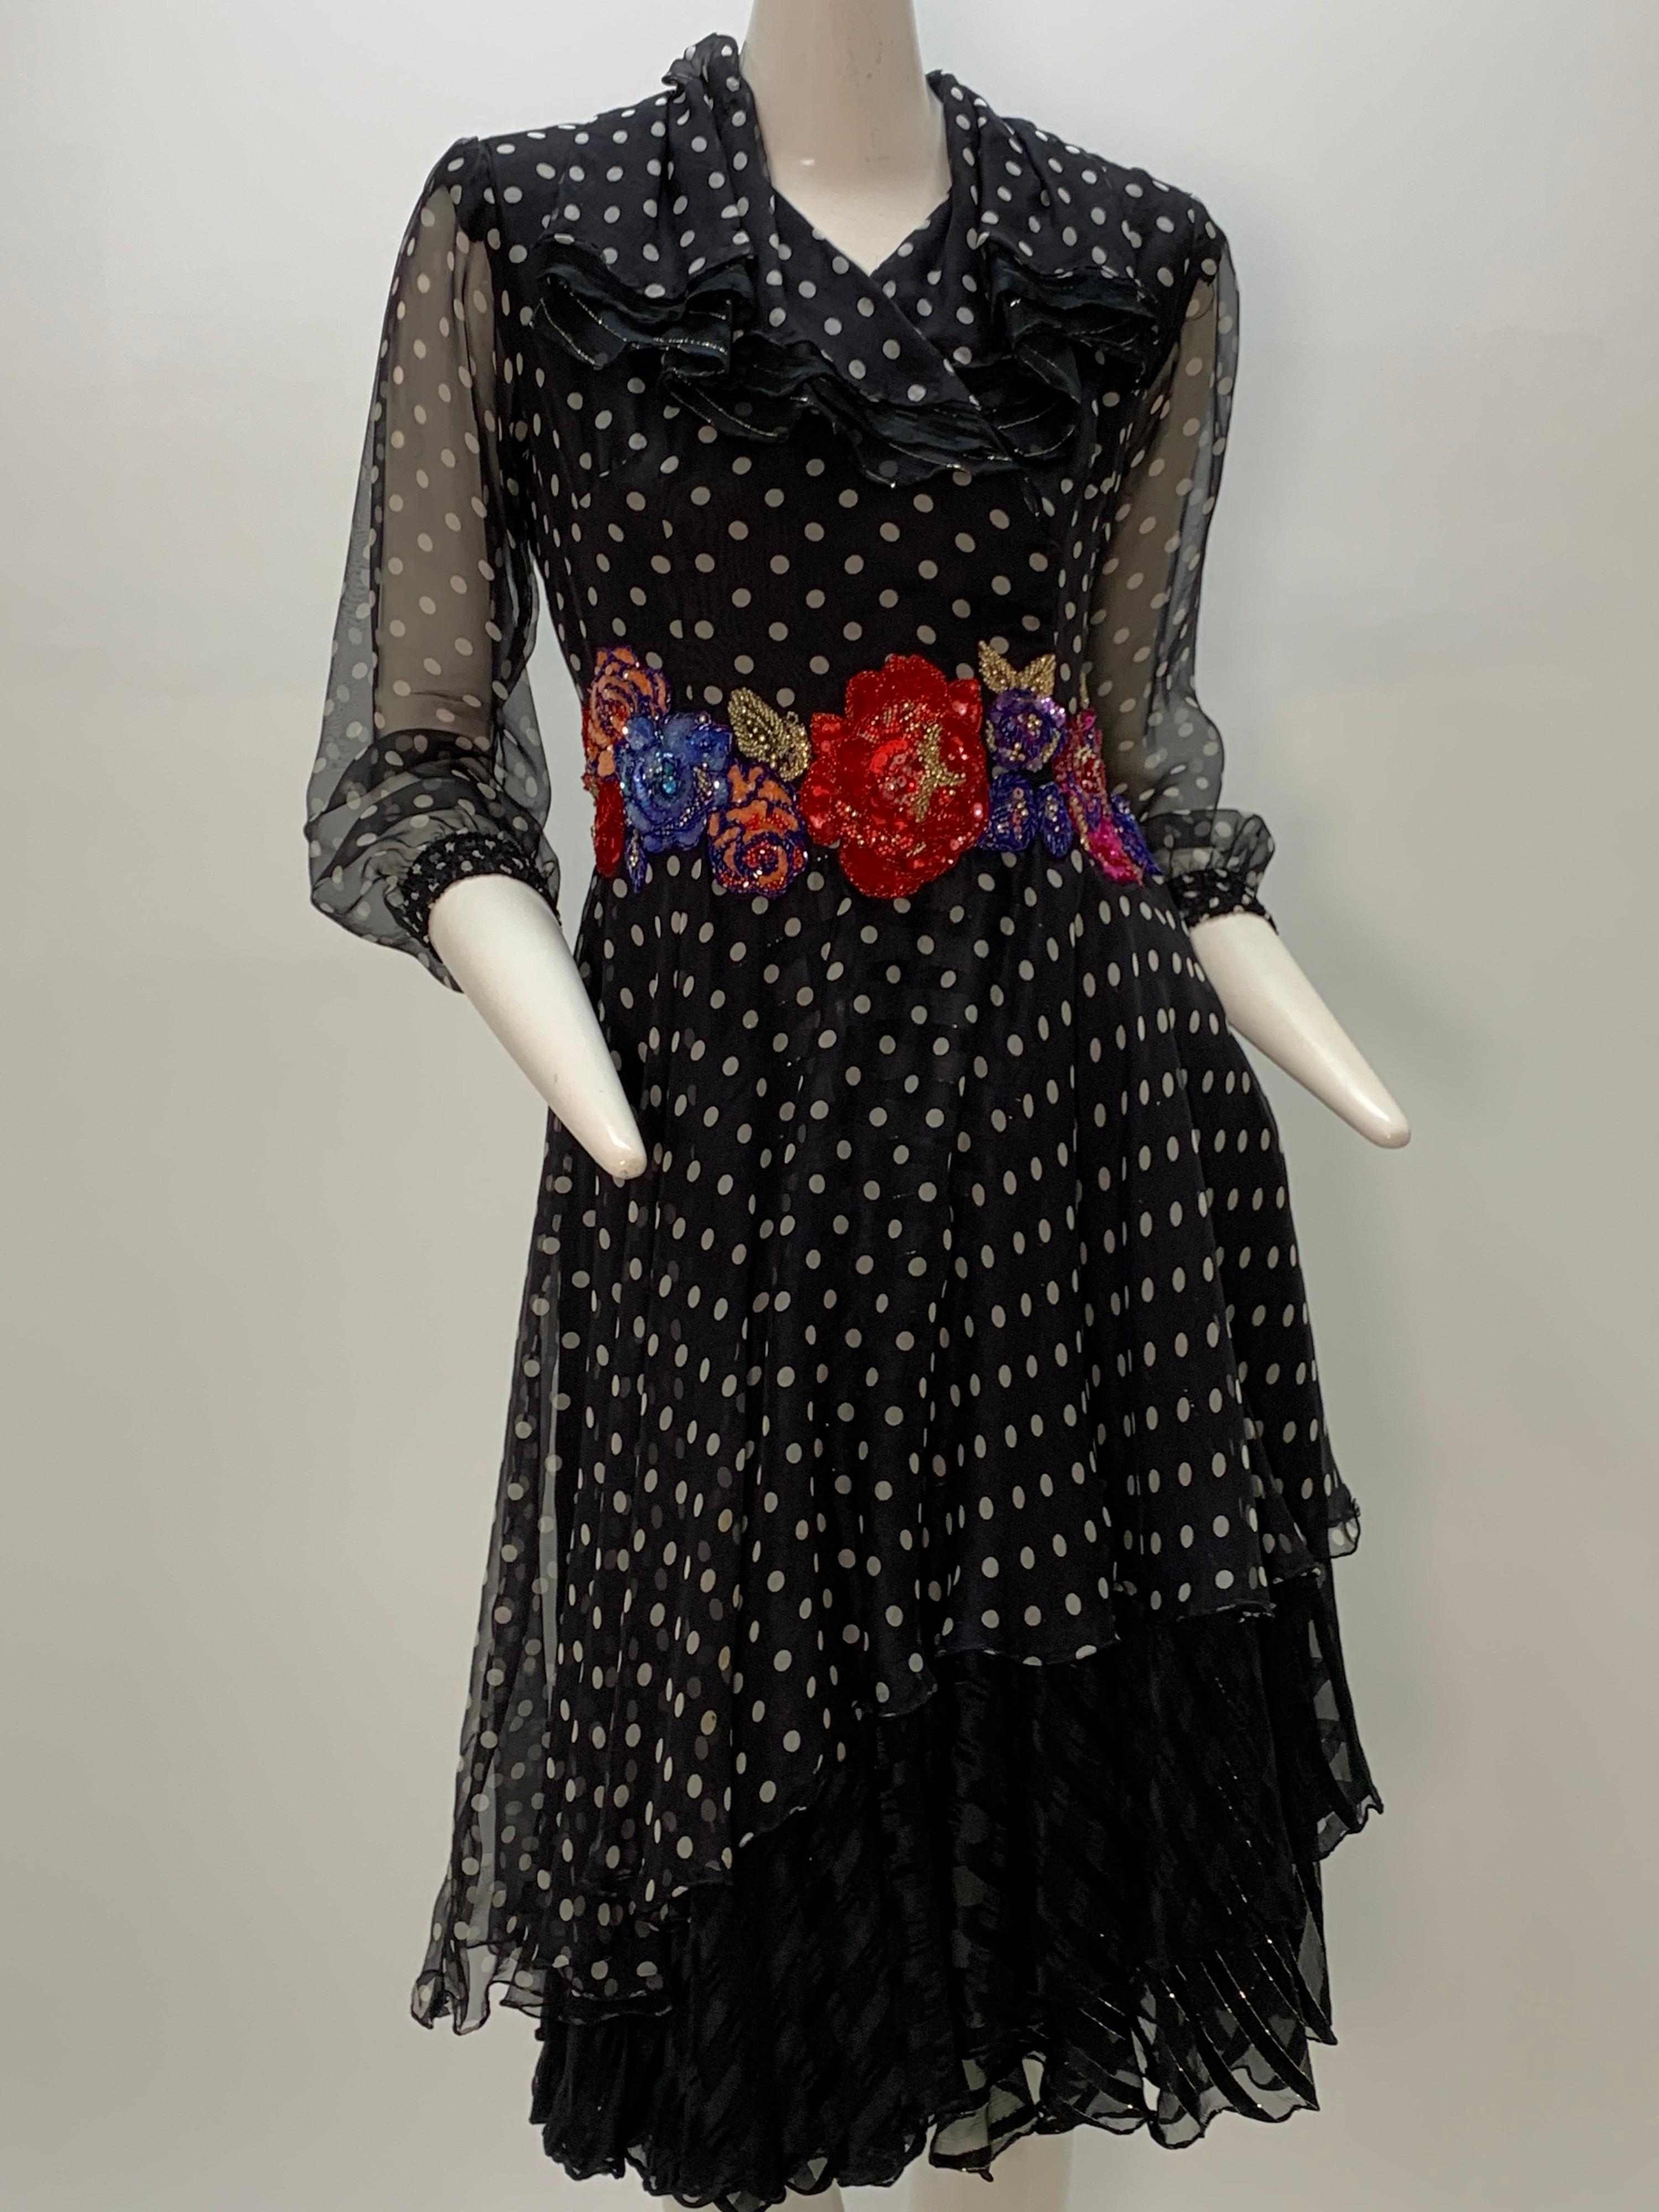 Women's 1980 Whimsical Silk Chiffon Polka Dot Dress W/ Colorful Beaded & Sequin Florals 